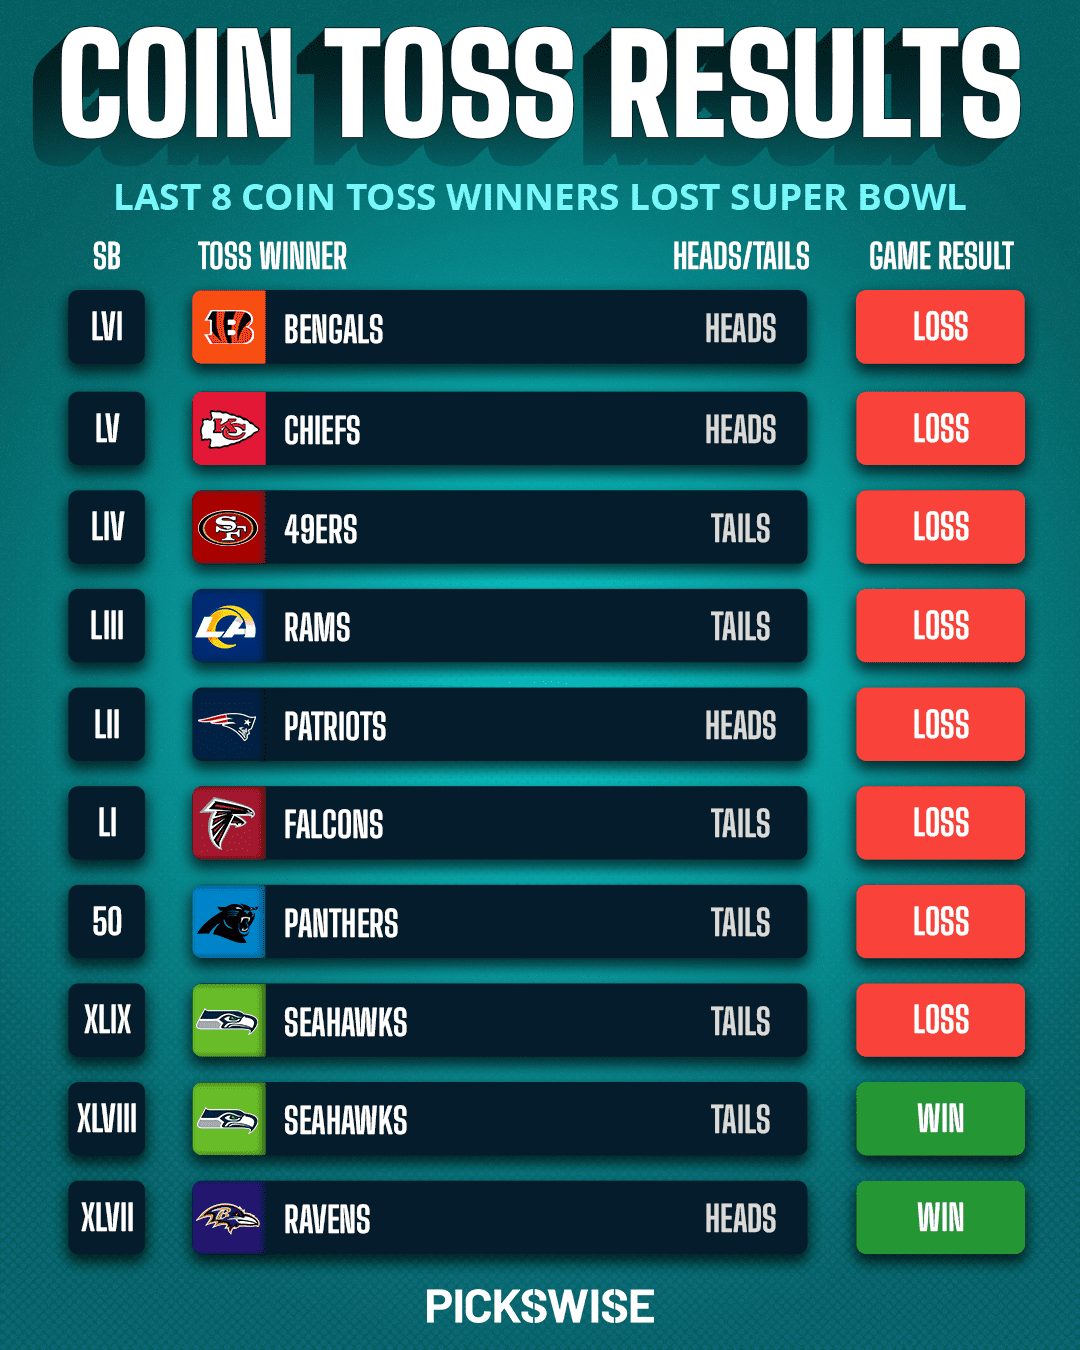 Photo: previous super bowl coin toss results